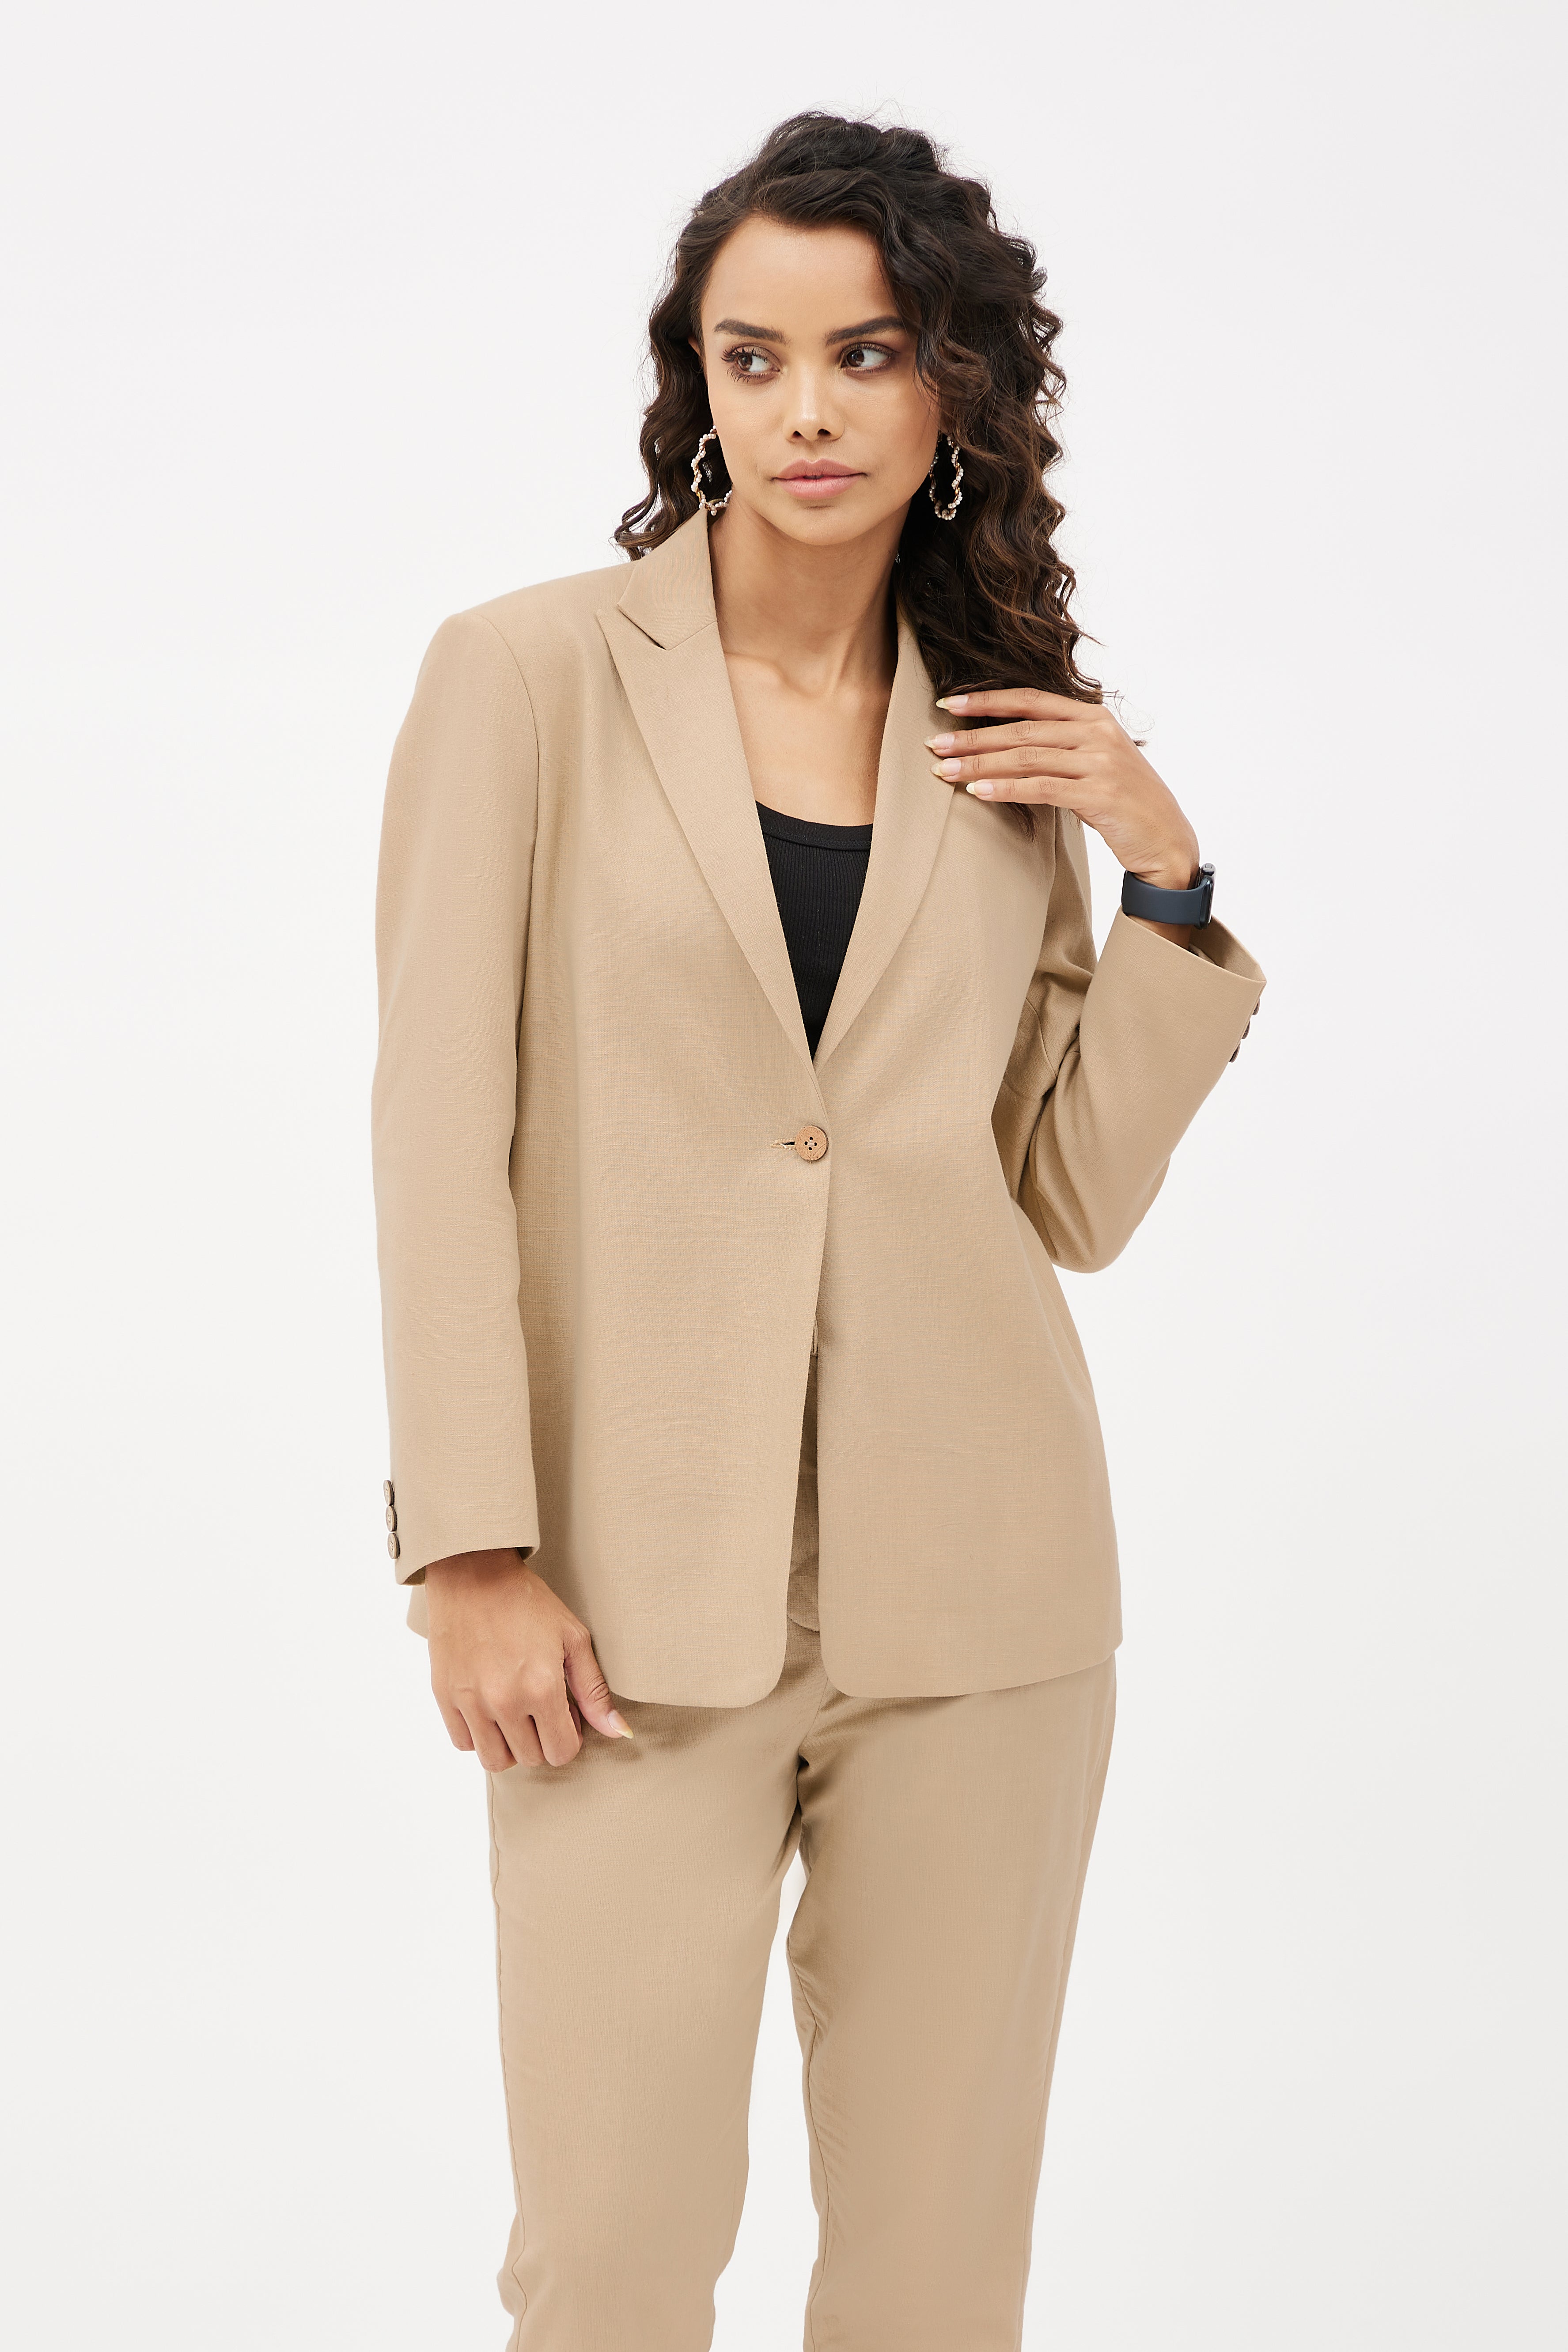 Buy Women's 2 Pieces Office Lady Blazer Set Formal Business Pant Suit  Blazer Jacket,Pant/Skirt Grey at Amazon.in